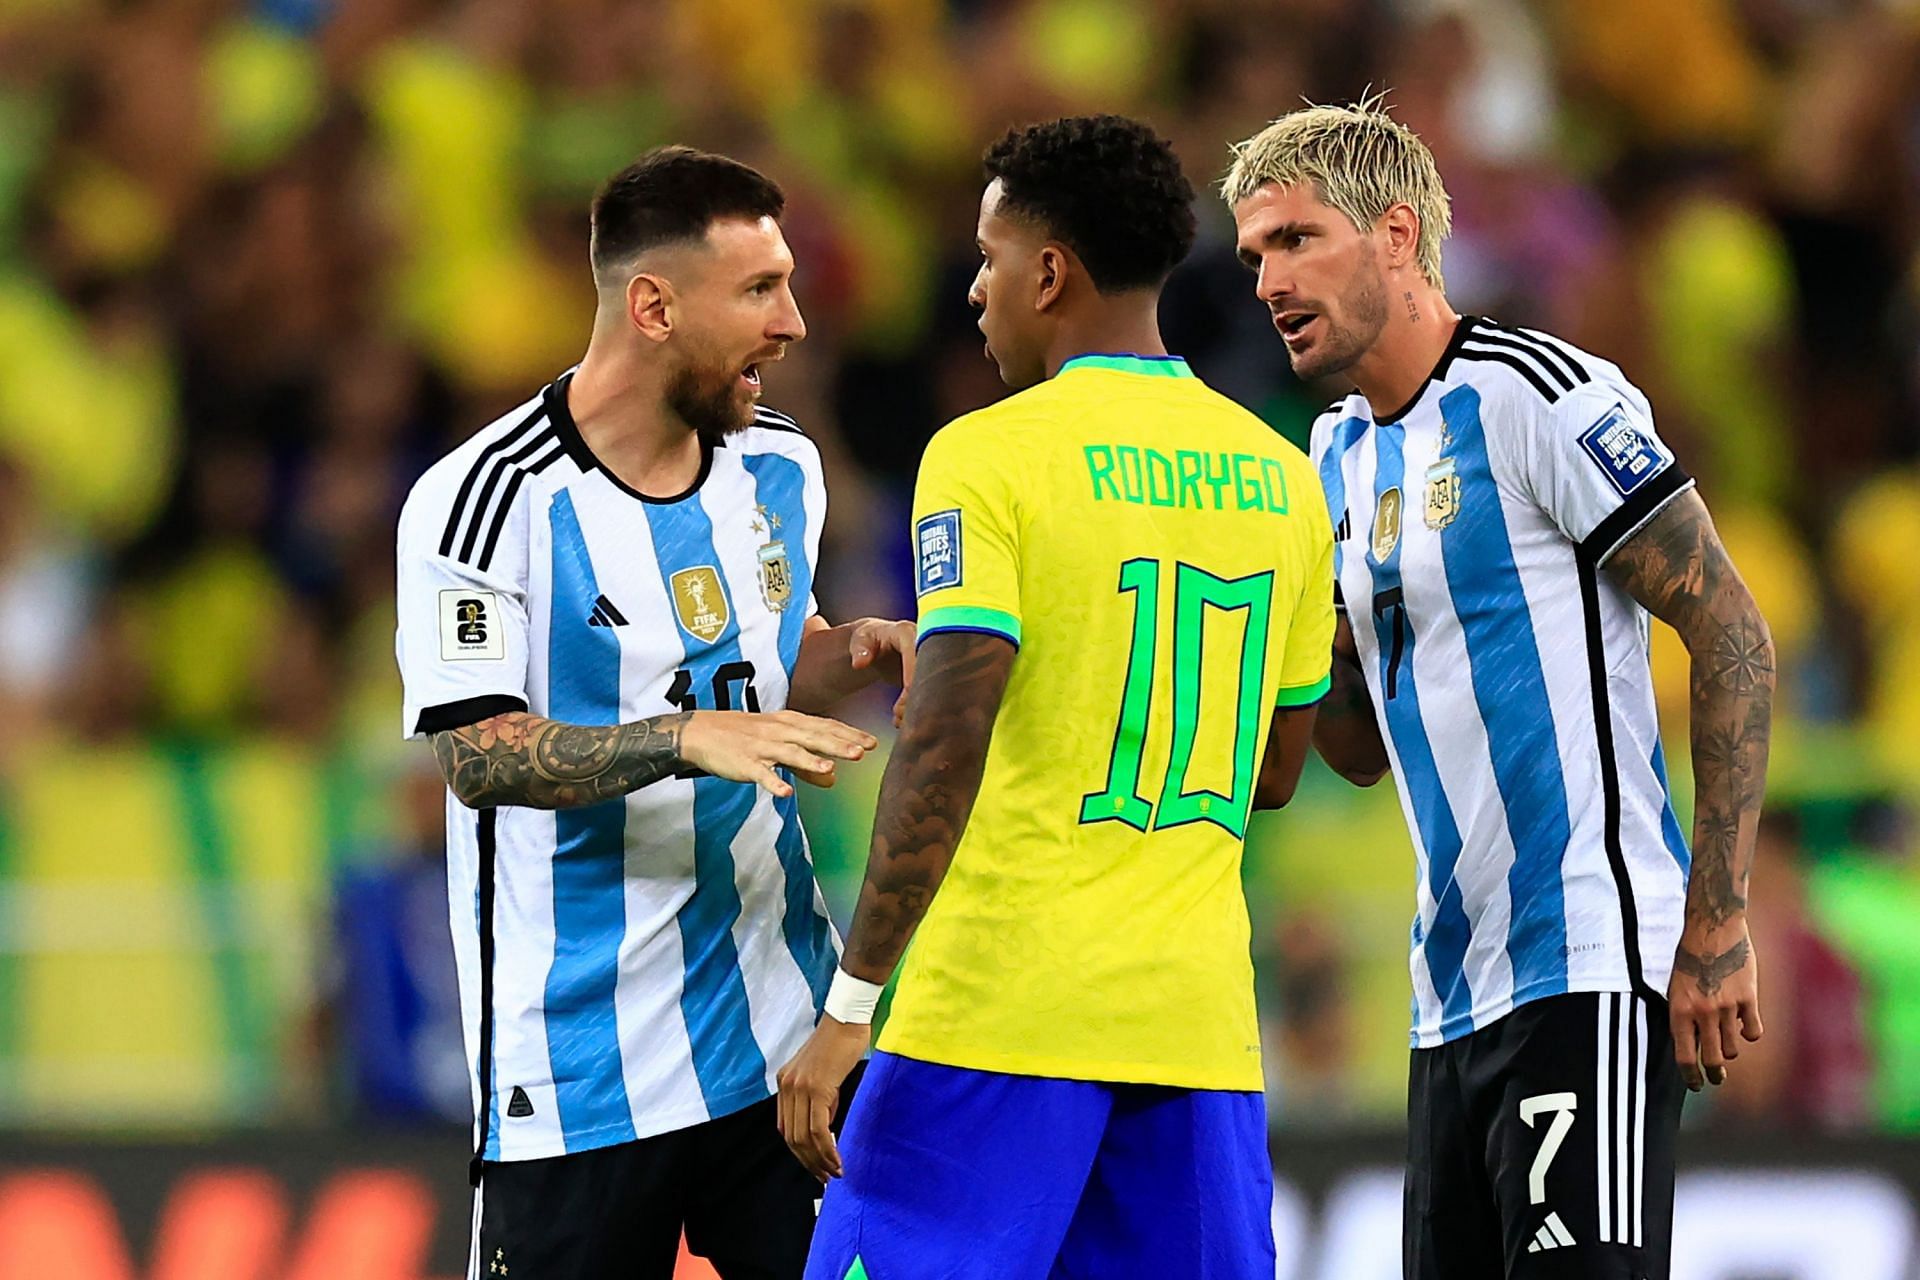 Lionel Messi argued with Rodrygo.